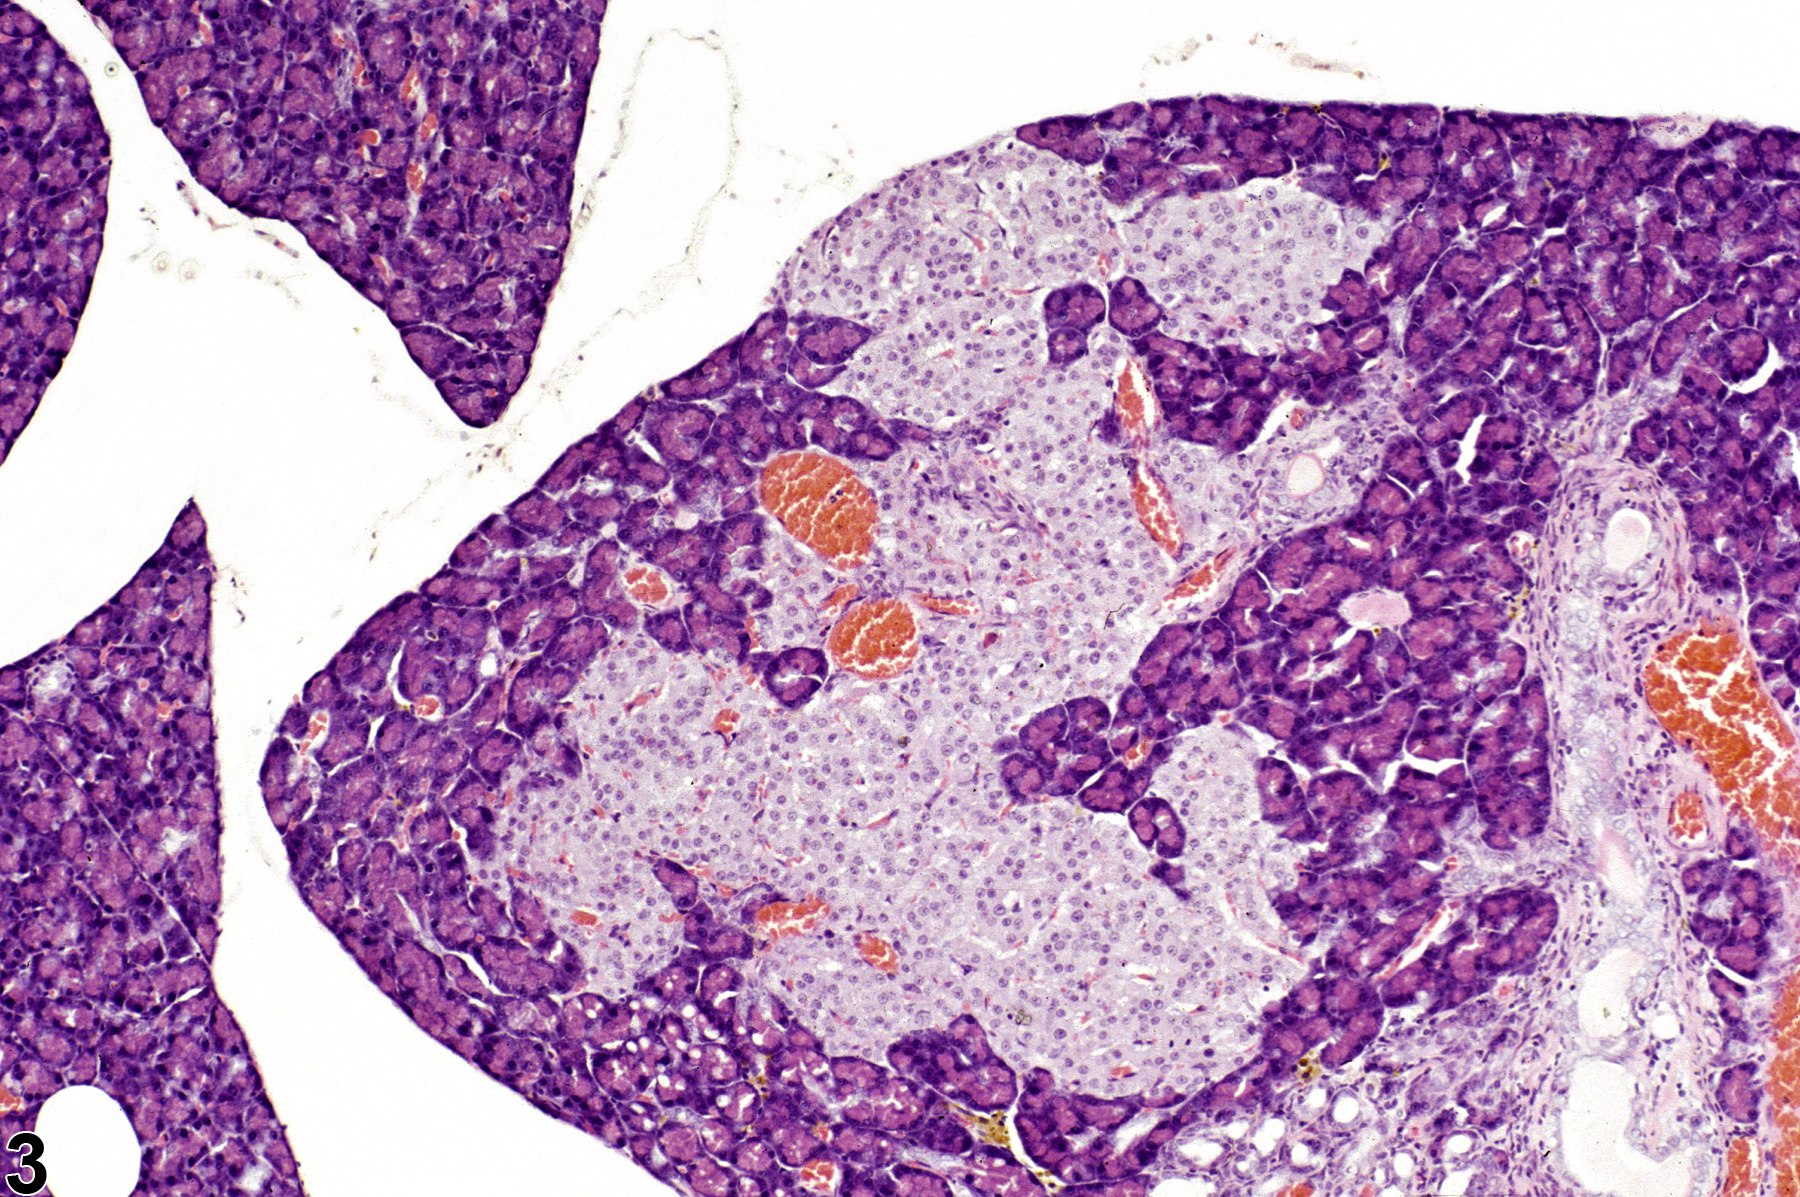 Image of hyperplasia in the pancreatic islet from a male B6C3F1 mouse in a chronic study